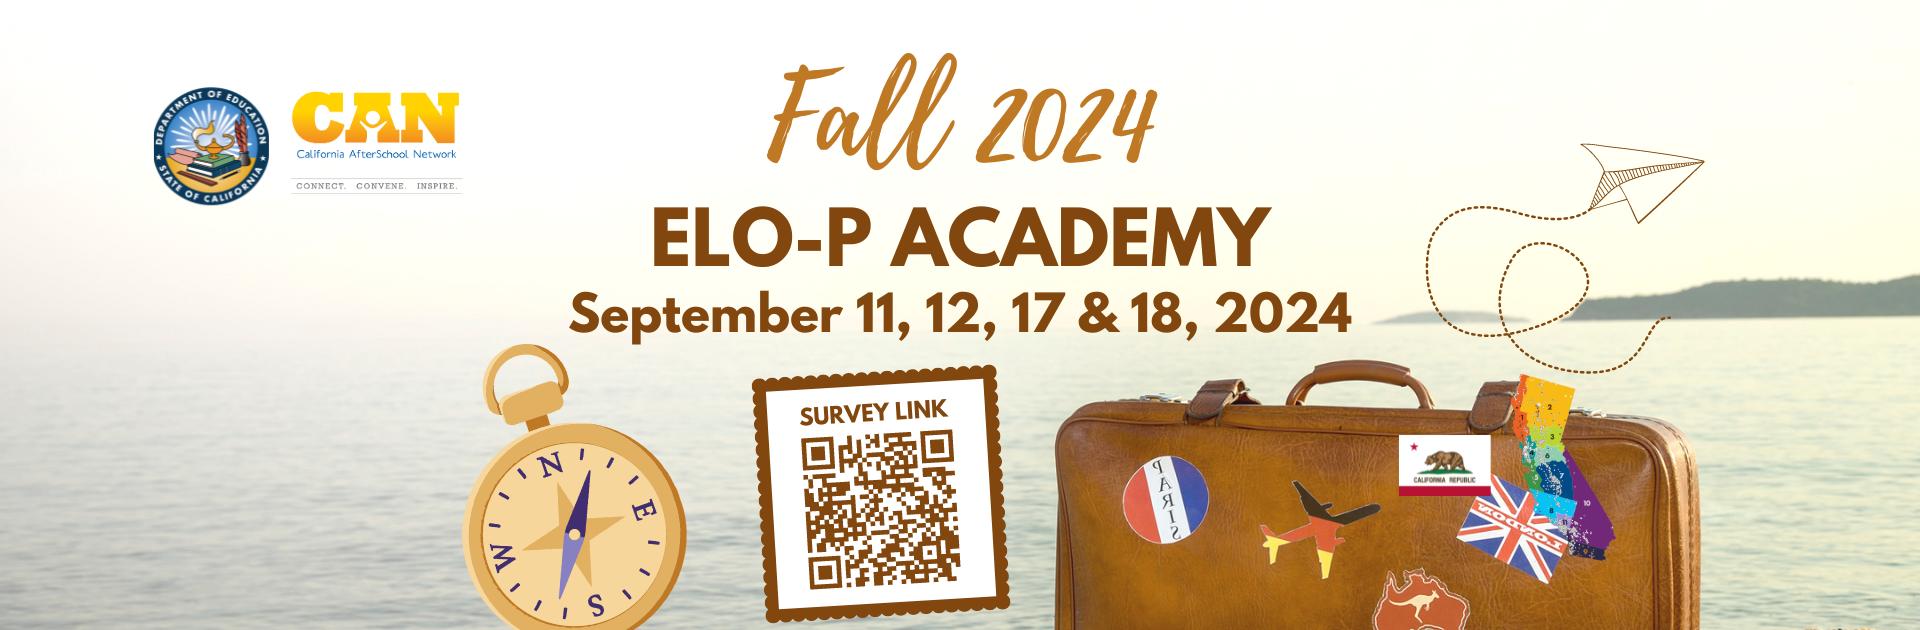 Fall 2024 ELO-P Academy September 11, 12, 17 & 18, 2024 with CAN and CDE logos, ocean in the background, a gold compass, and a brown suitcase with patches on it.